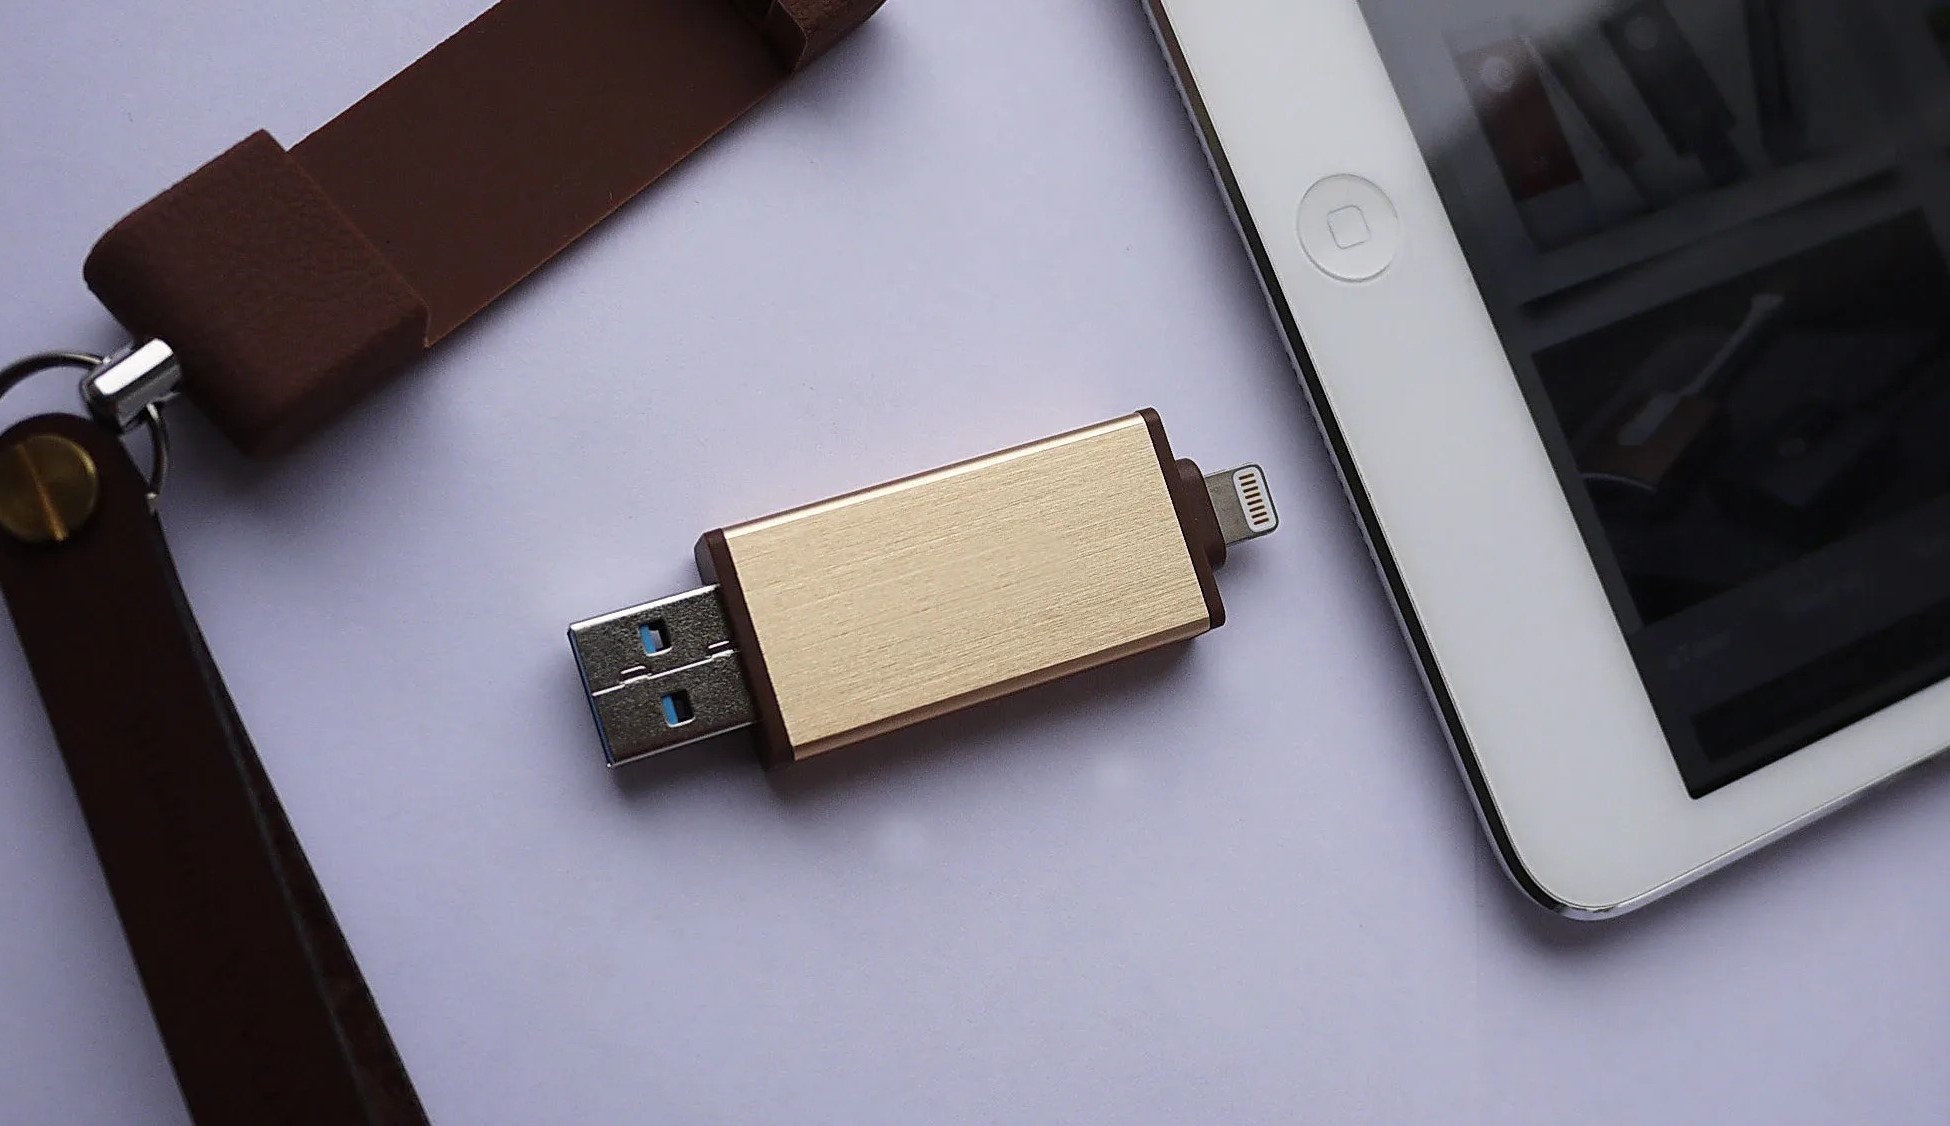 How To Download Movies To A USB Drive